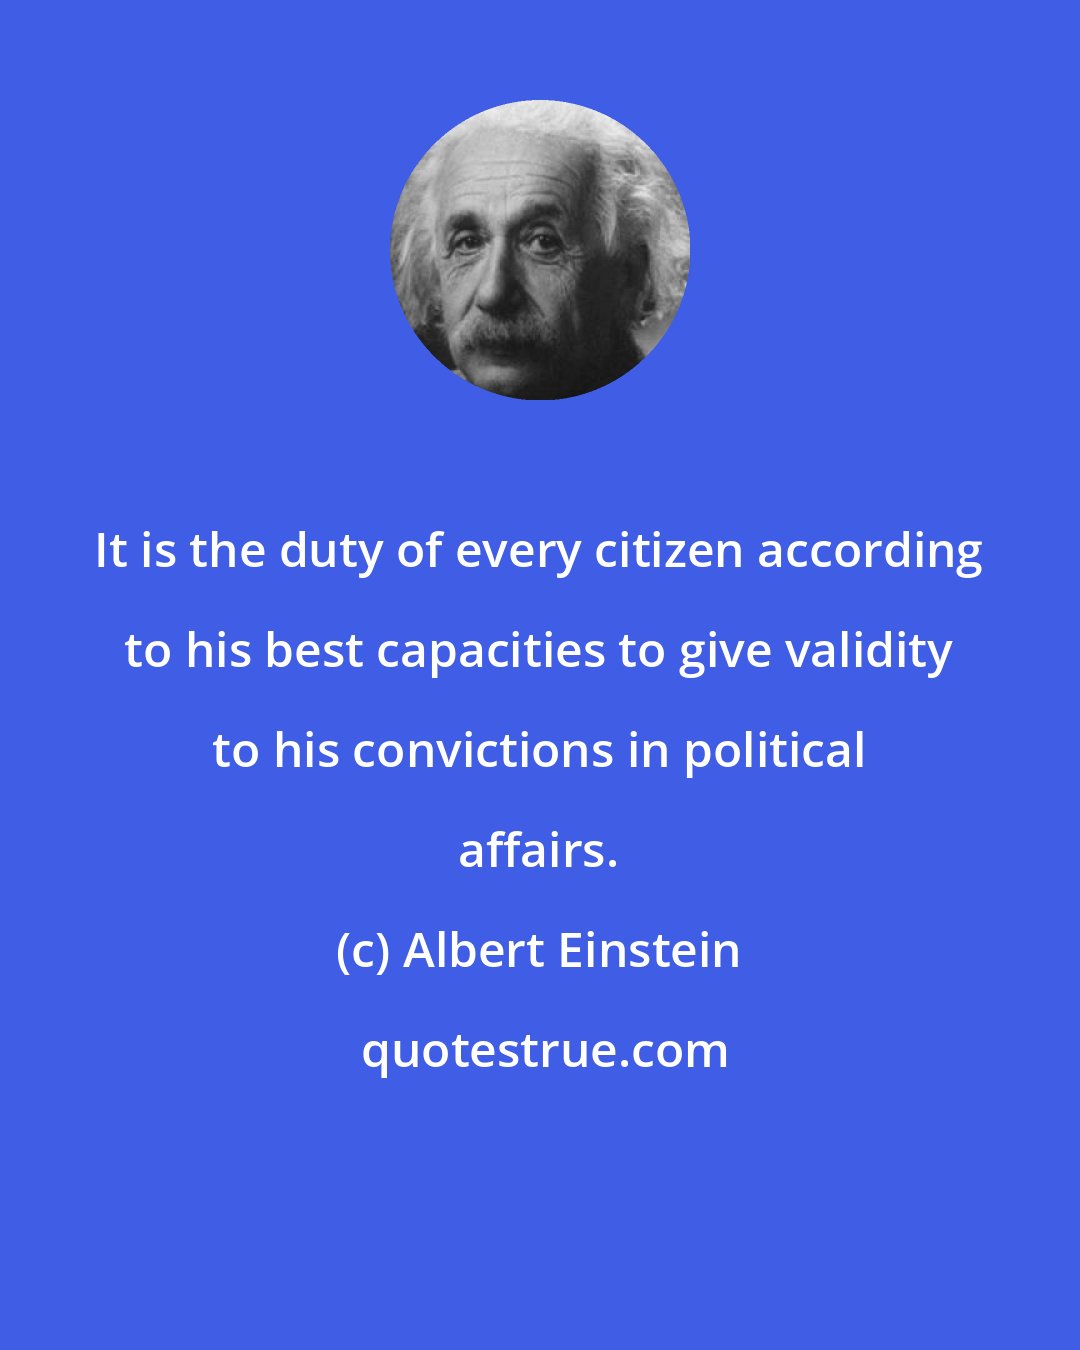 Albert Einstein: It is the duty of every citizen according to his best capacities to give validity to his convictions in political affairs.